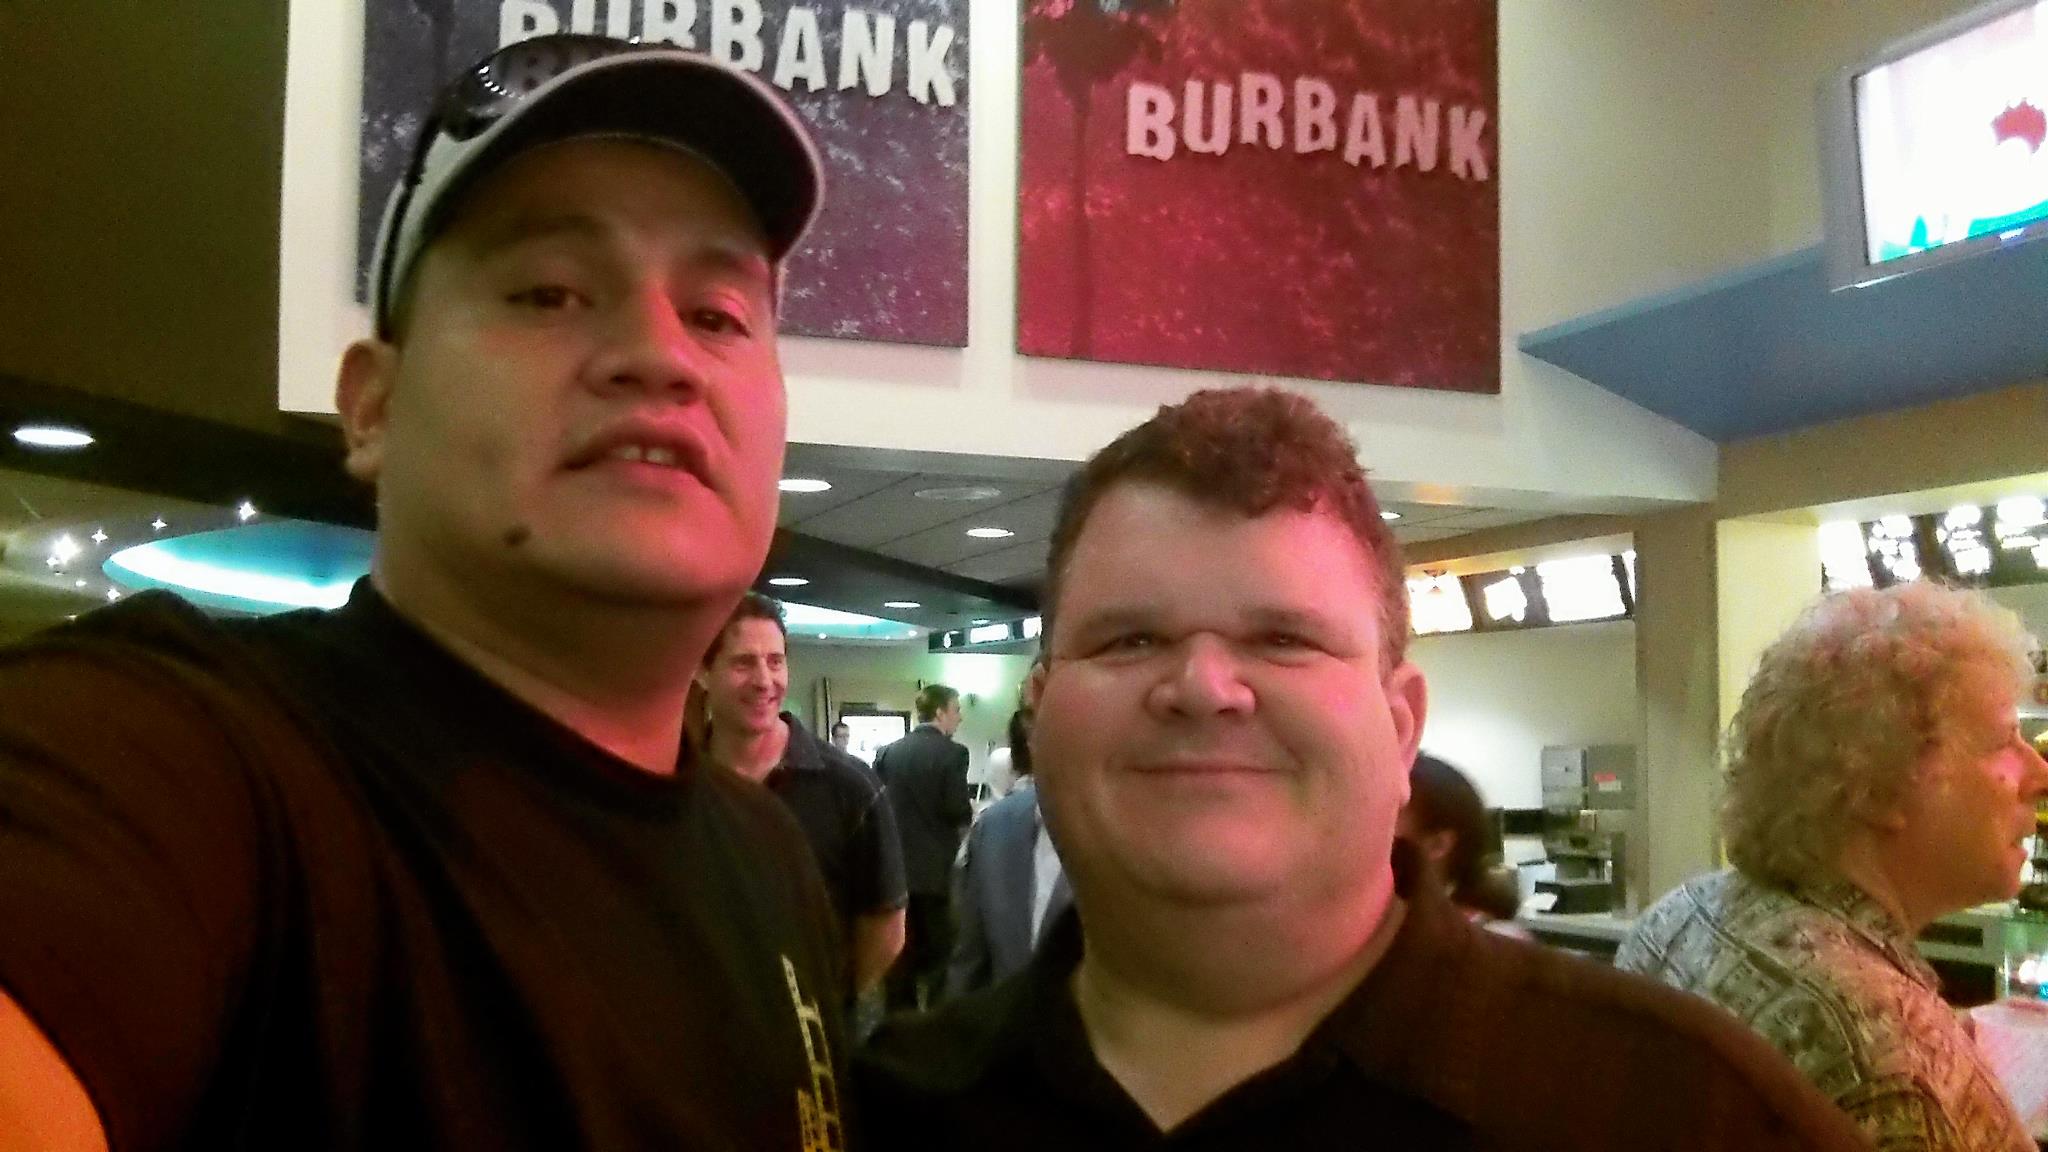 Adrian I. Iniguez and Robert Deioma on the Red Carpet for BIFF, the Burbank International Film Festival. Official Selection, Code 4: Security Officer On Duty created by Robert Deioma